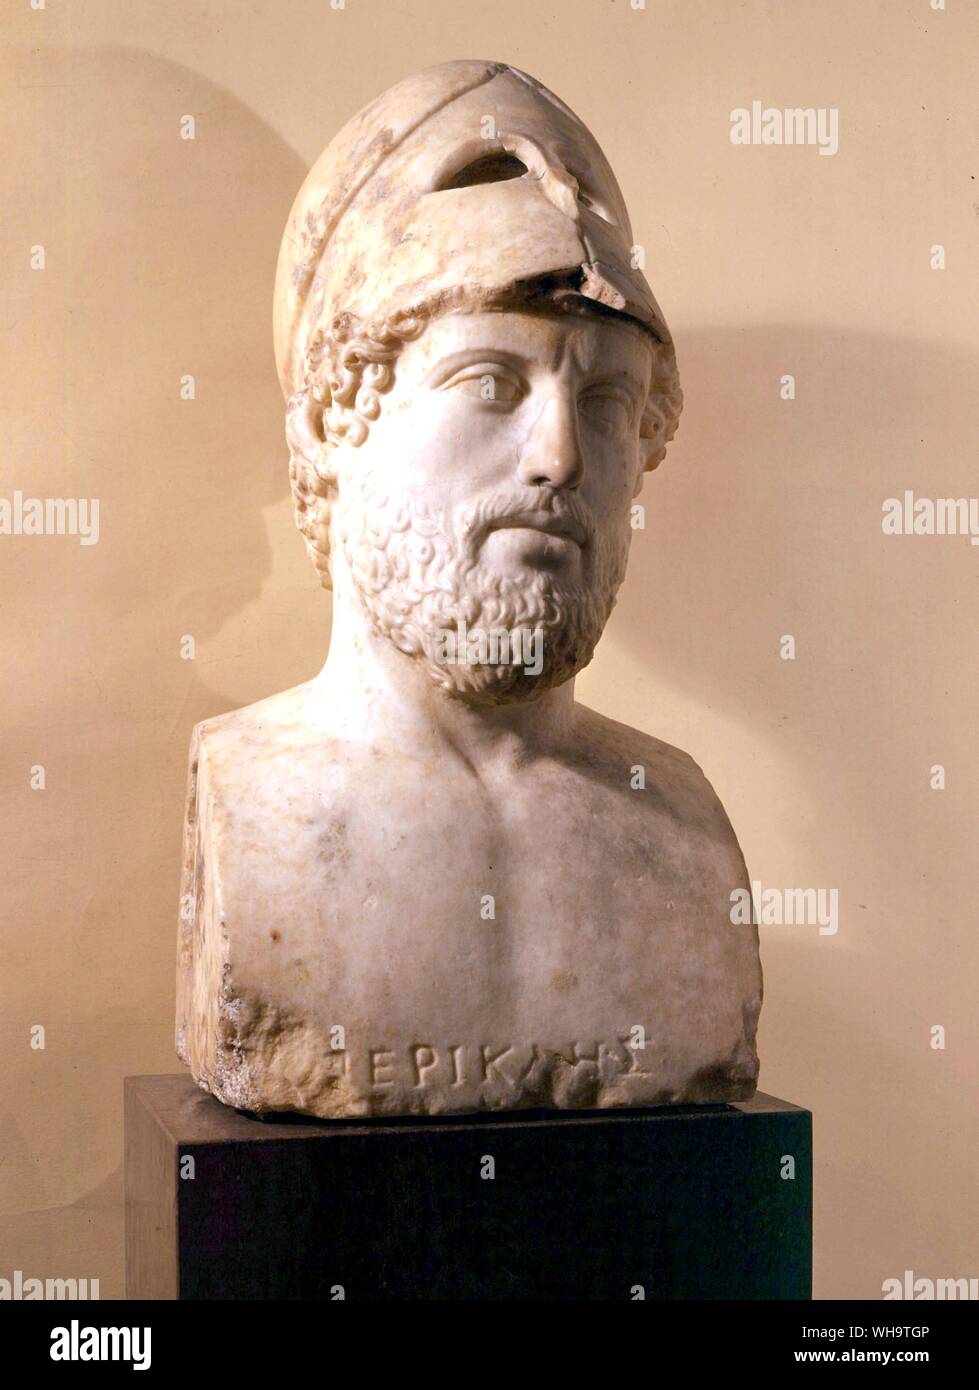 Pericles, the most influential man in Athens at the height of her achievement, wearing a helmet Stock Photo